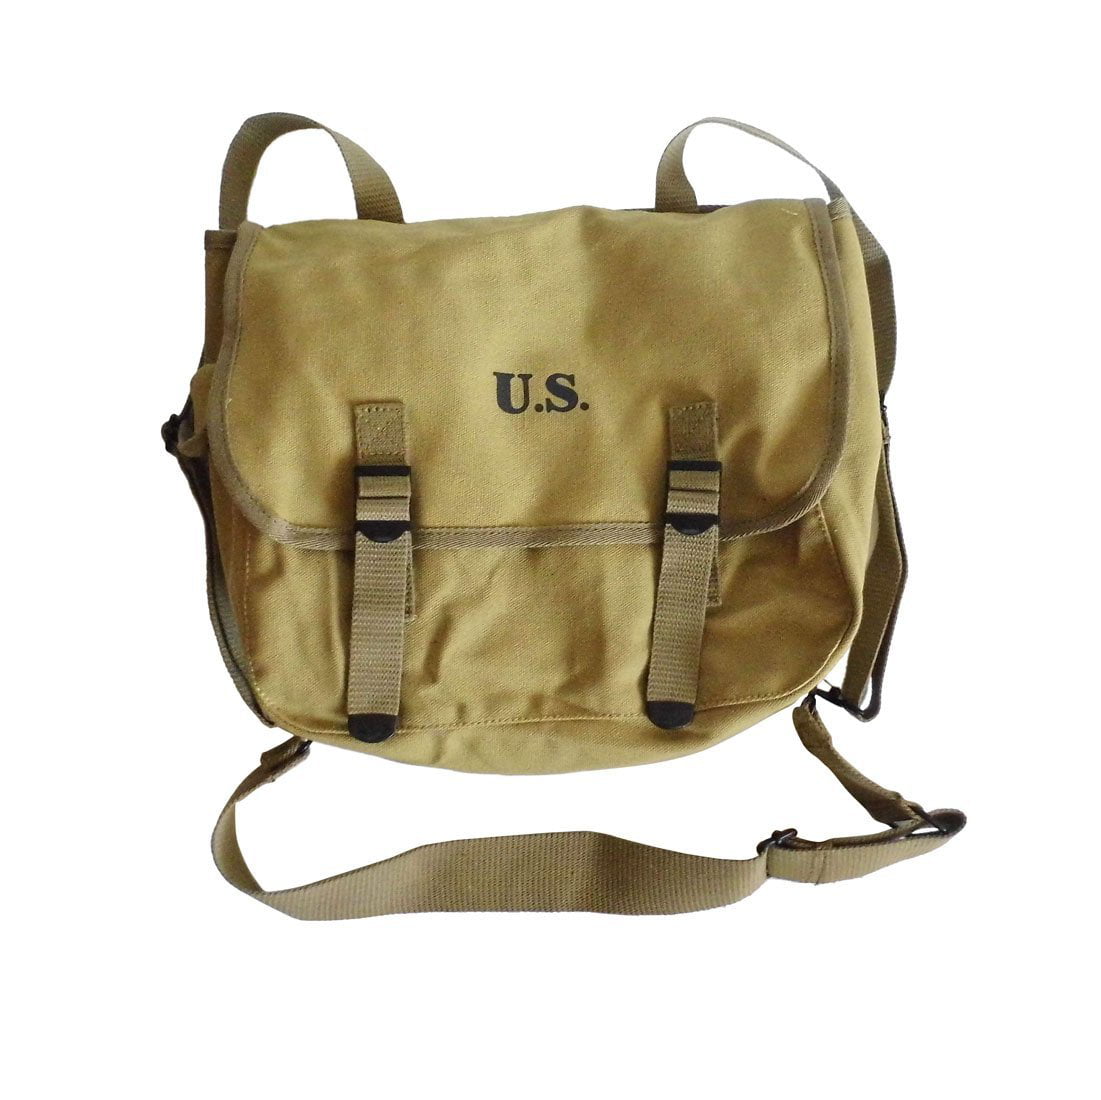 WWII WW2 US M36 Haversack Musette Field Bag Military Back Pack Canvas Khaki NEW - www.semadata.org ...